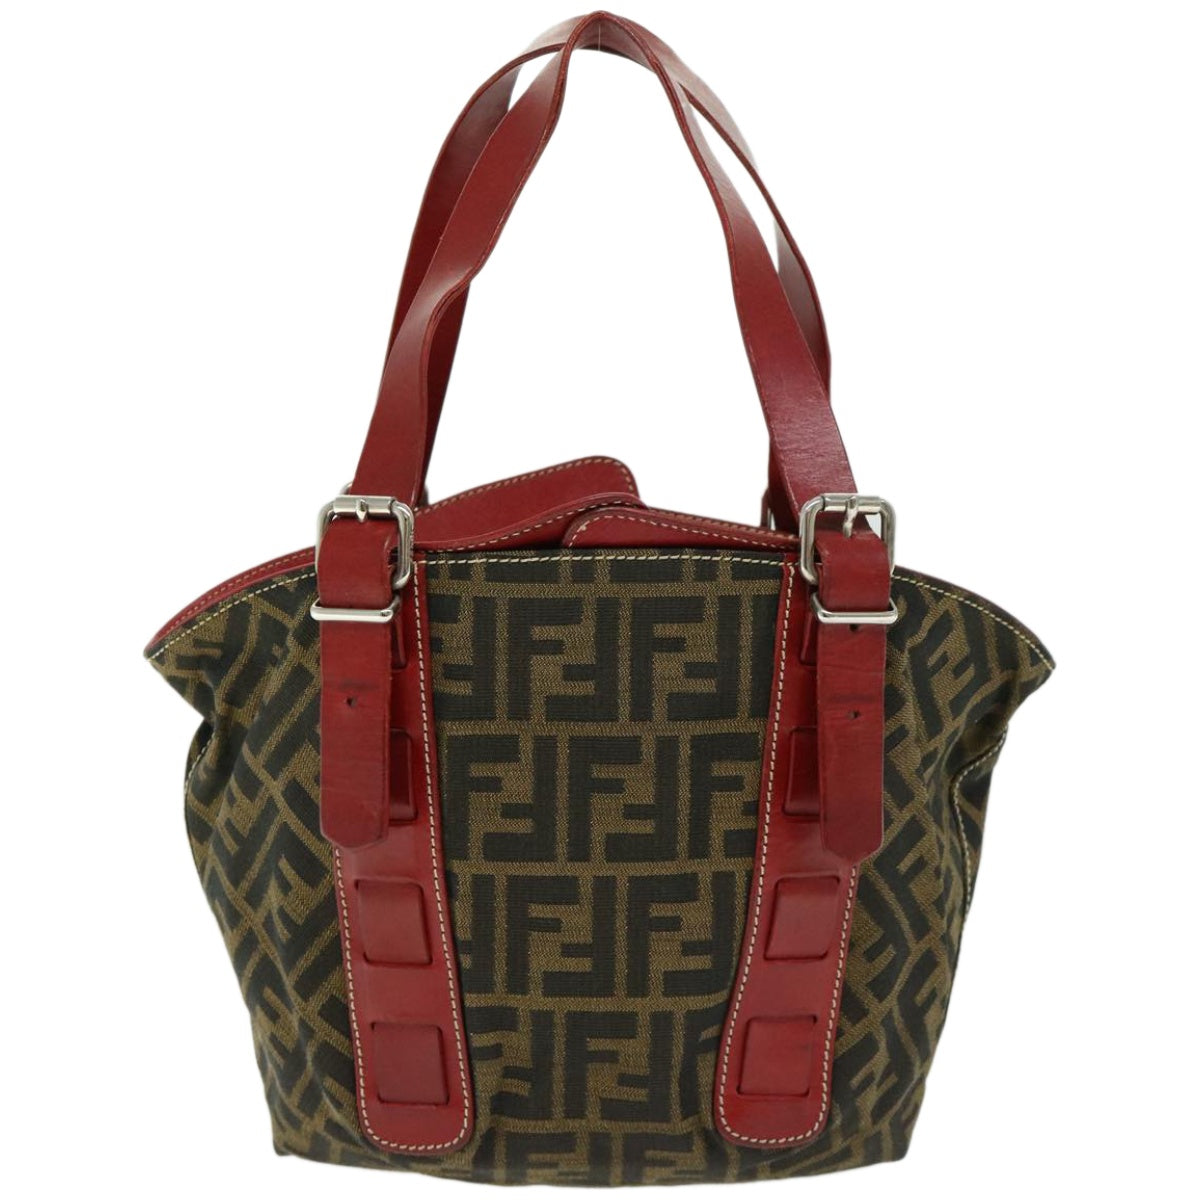 FENDI Zucca Canvas Hand Bag Brown Red Auth 66308 - 0